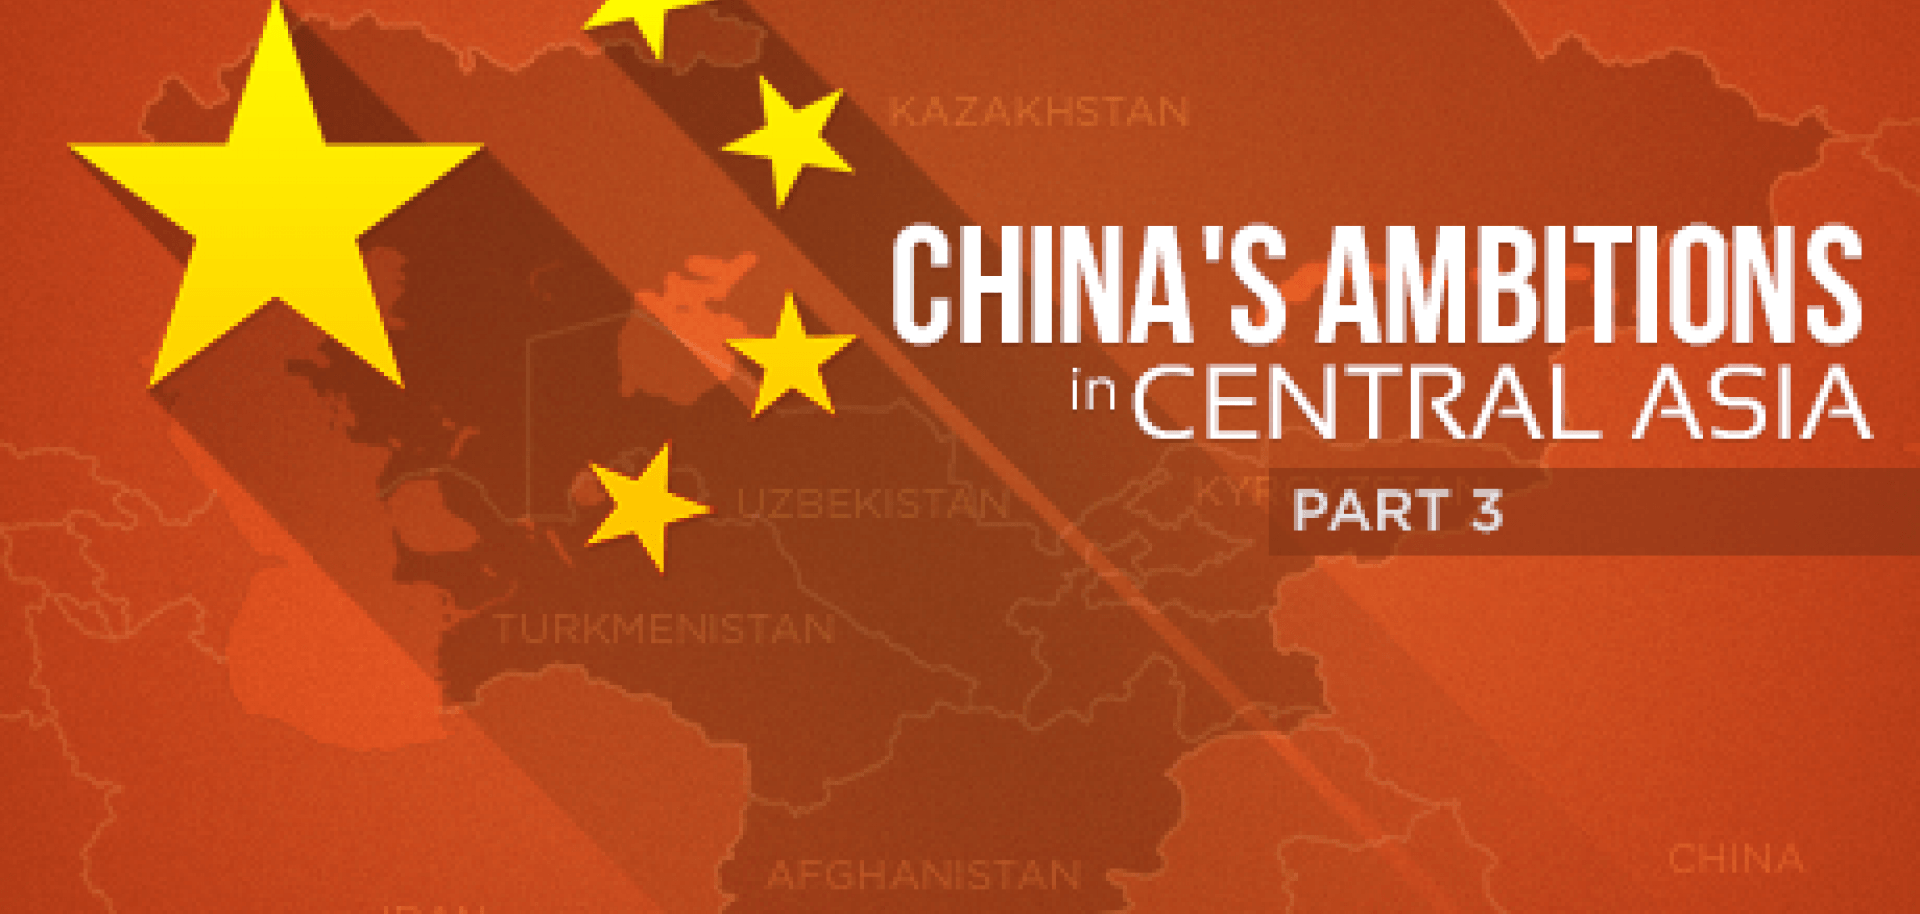 China's Ambitions in Central Asia